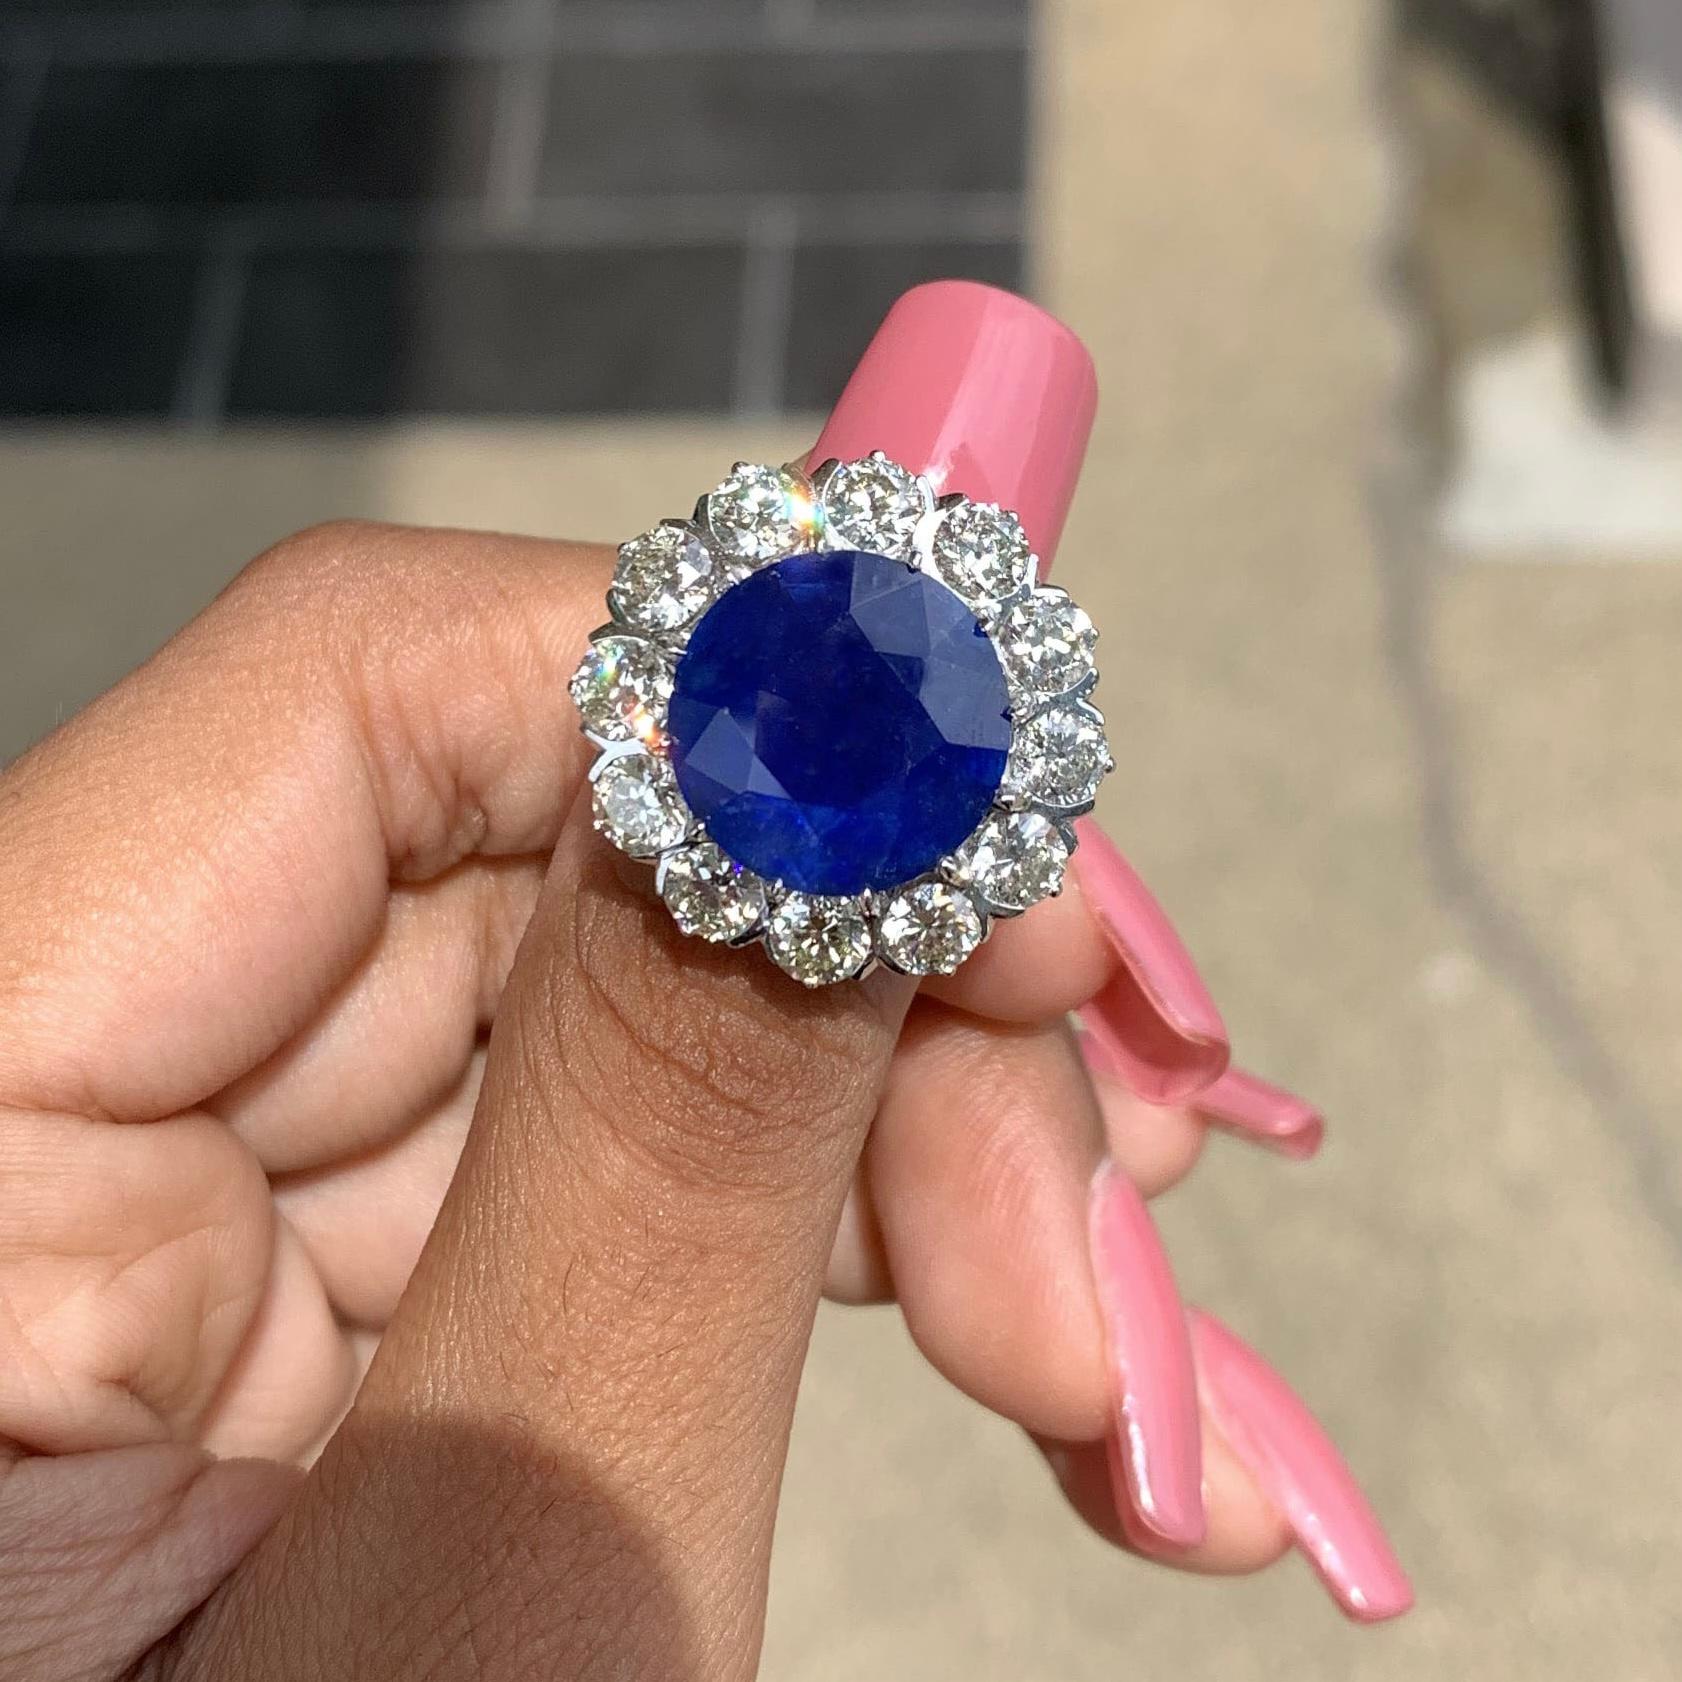 Presenting a true masterpiece of elegance and allure, this breathtaking statement Sapphire Ring! At the heart of this magnificent ring lies a breathtaking 10.60 carat sapphire. With its deep and alluring cornflower blue hue, the sapphire commands